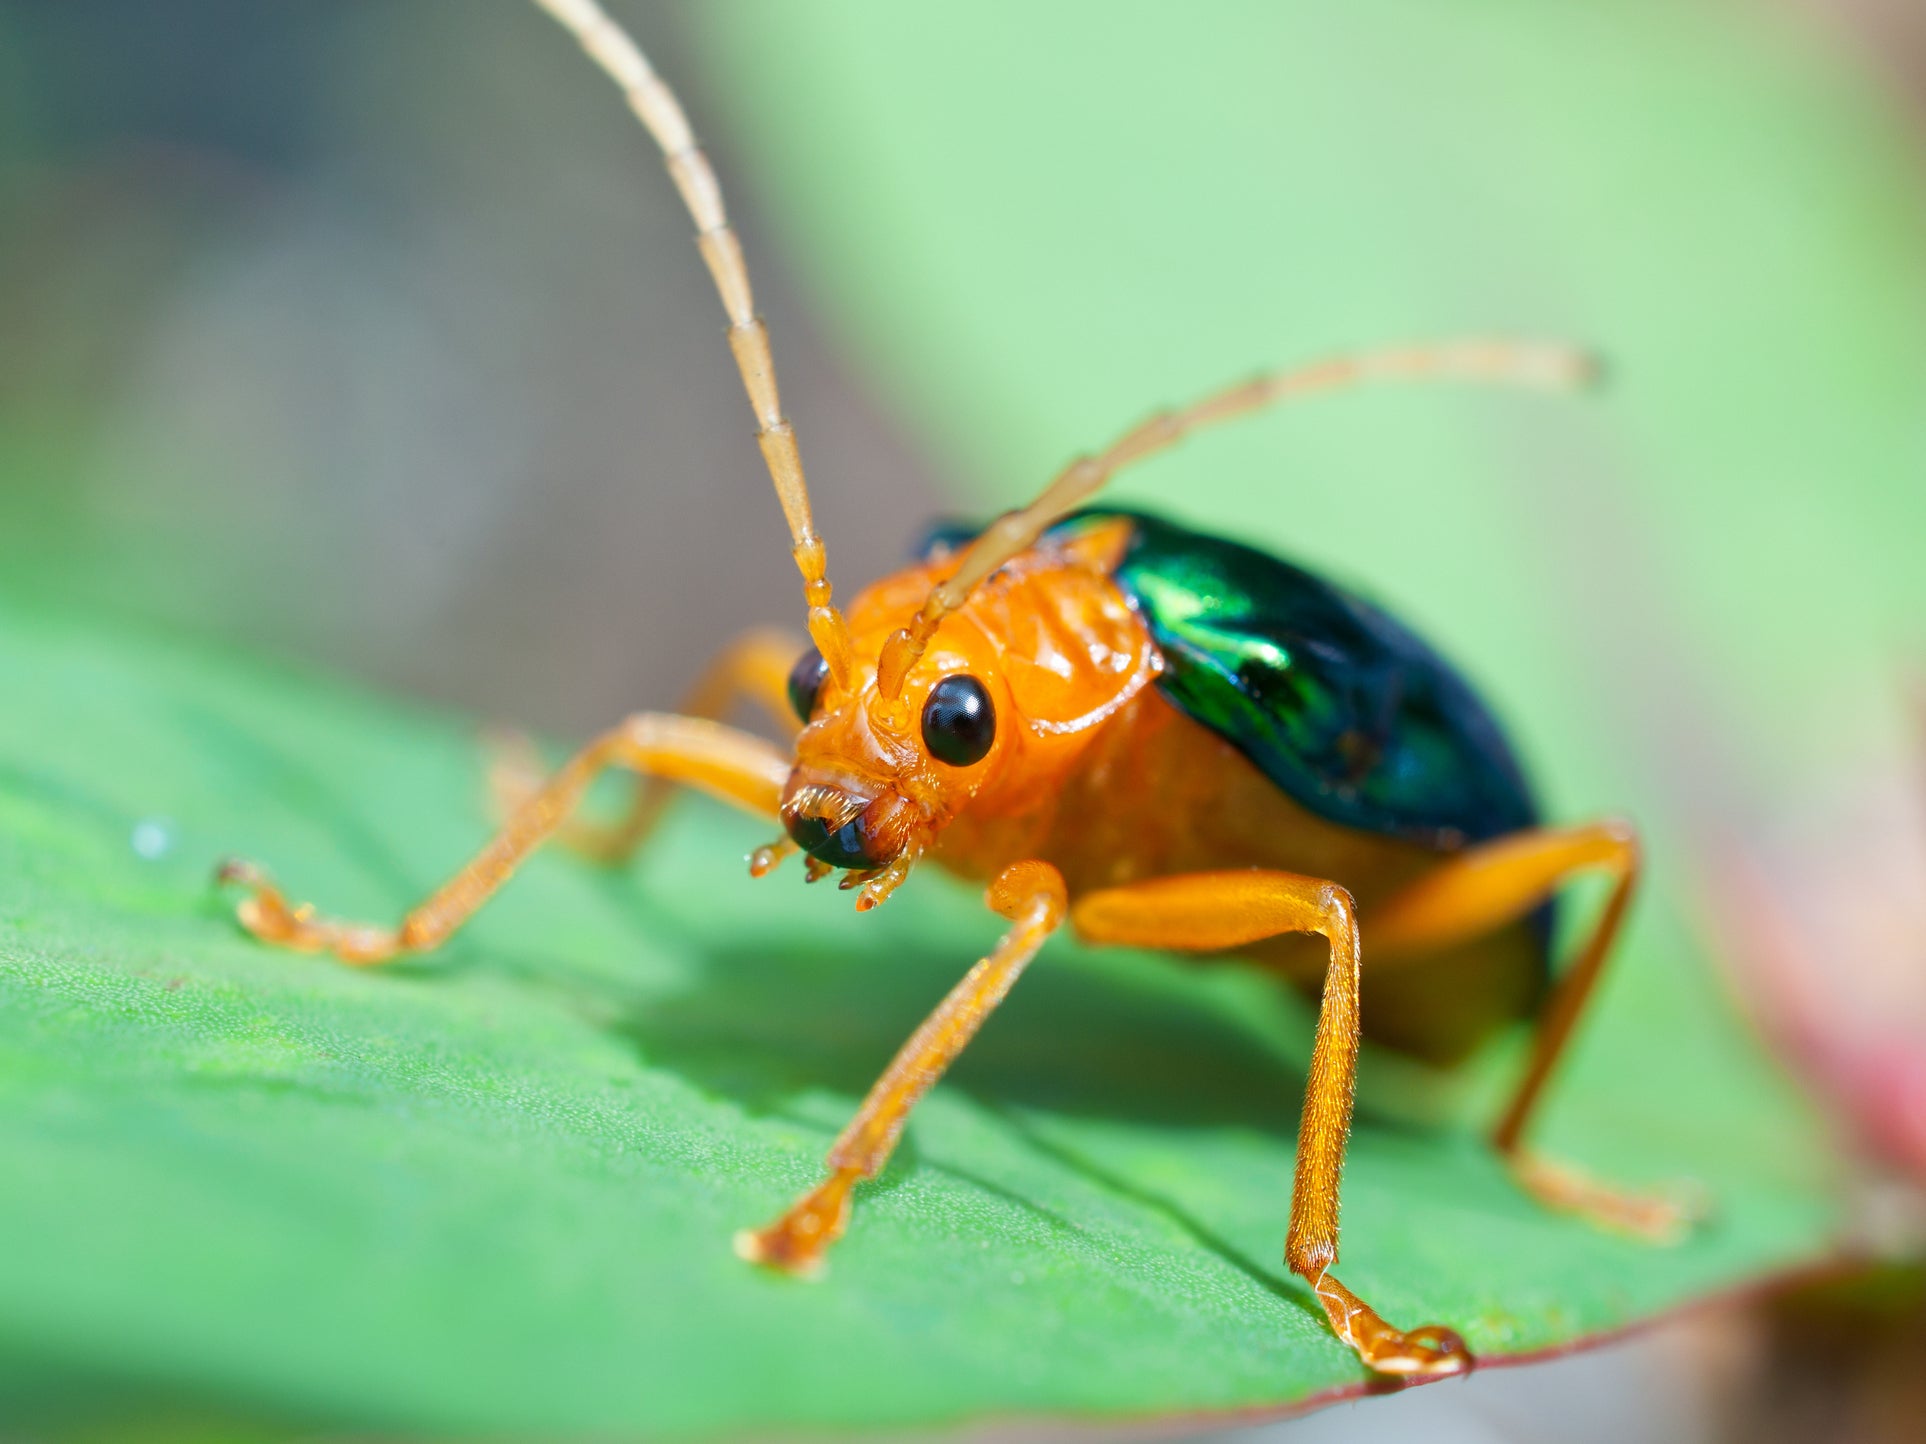 Bombardier beetle - this species fires hot jets of acid from its abdomen when threatened